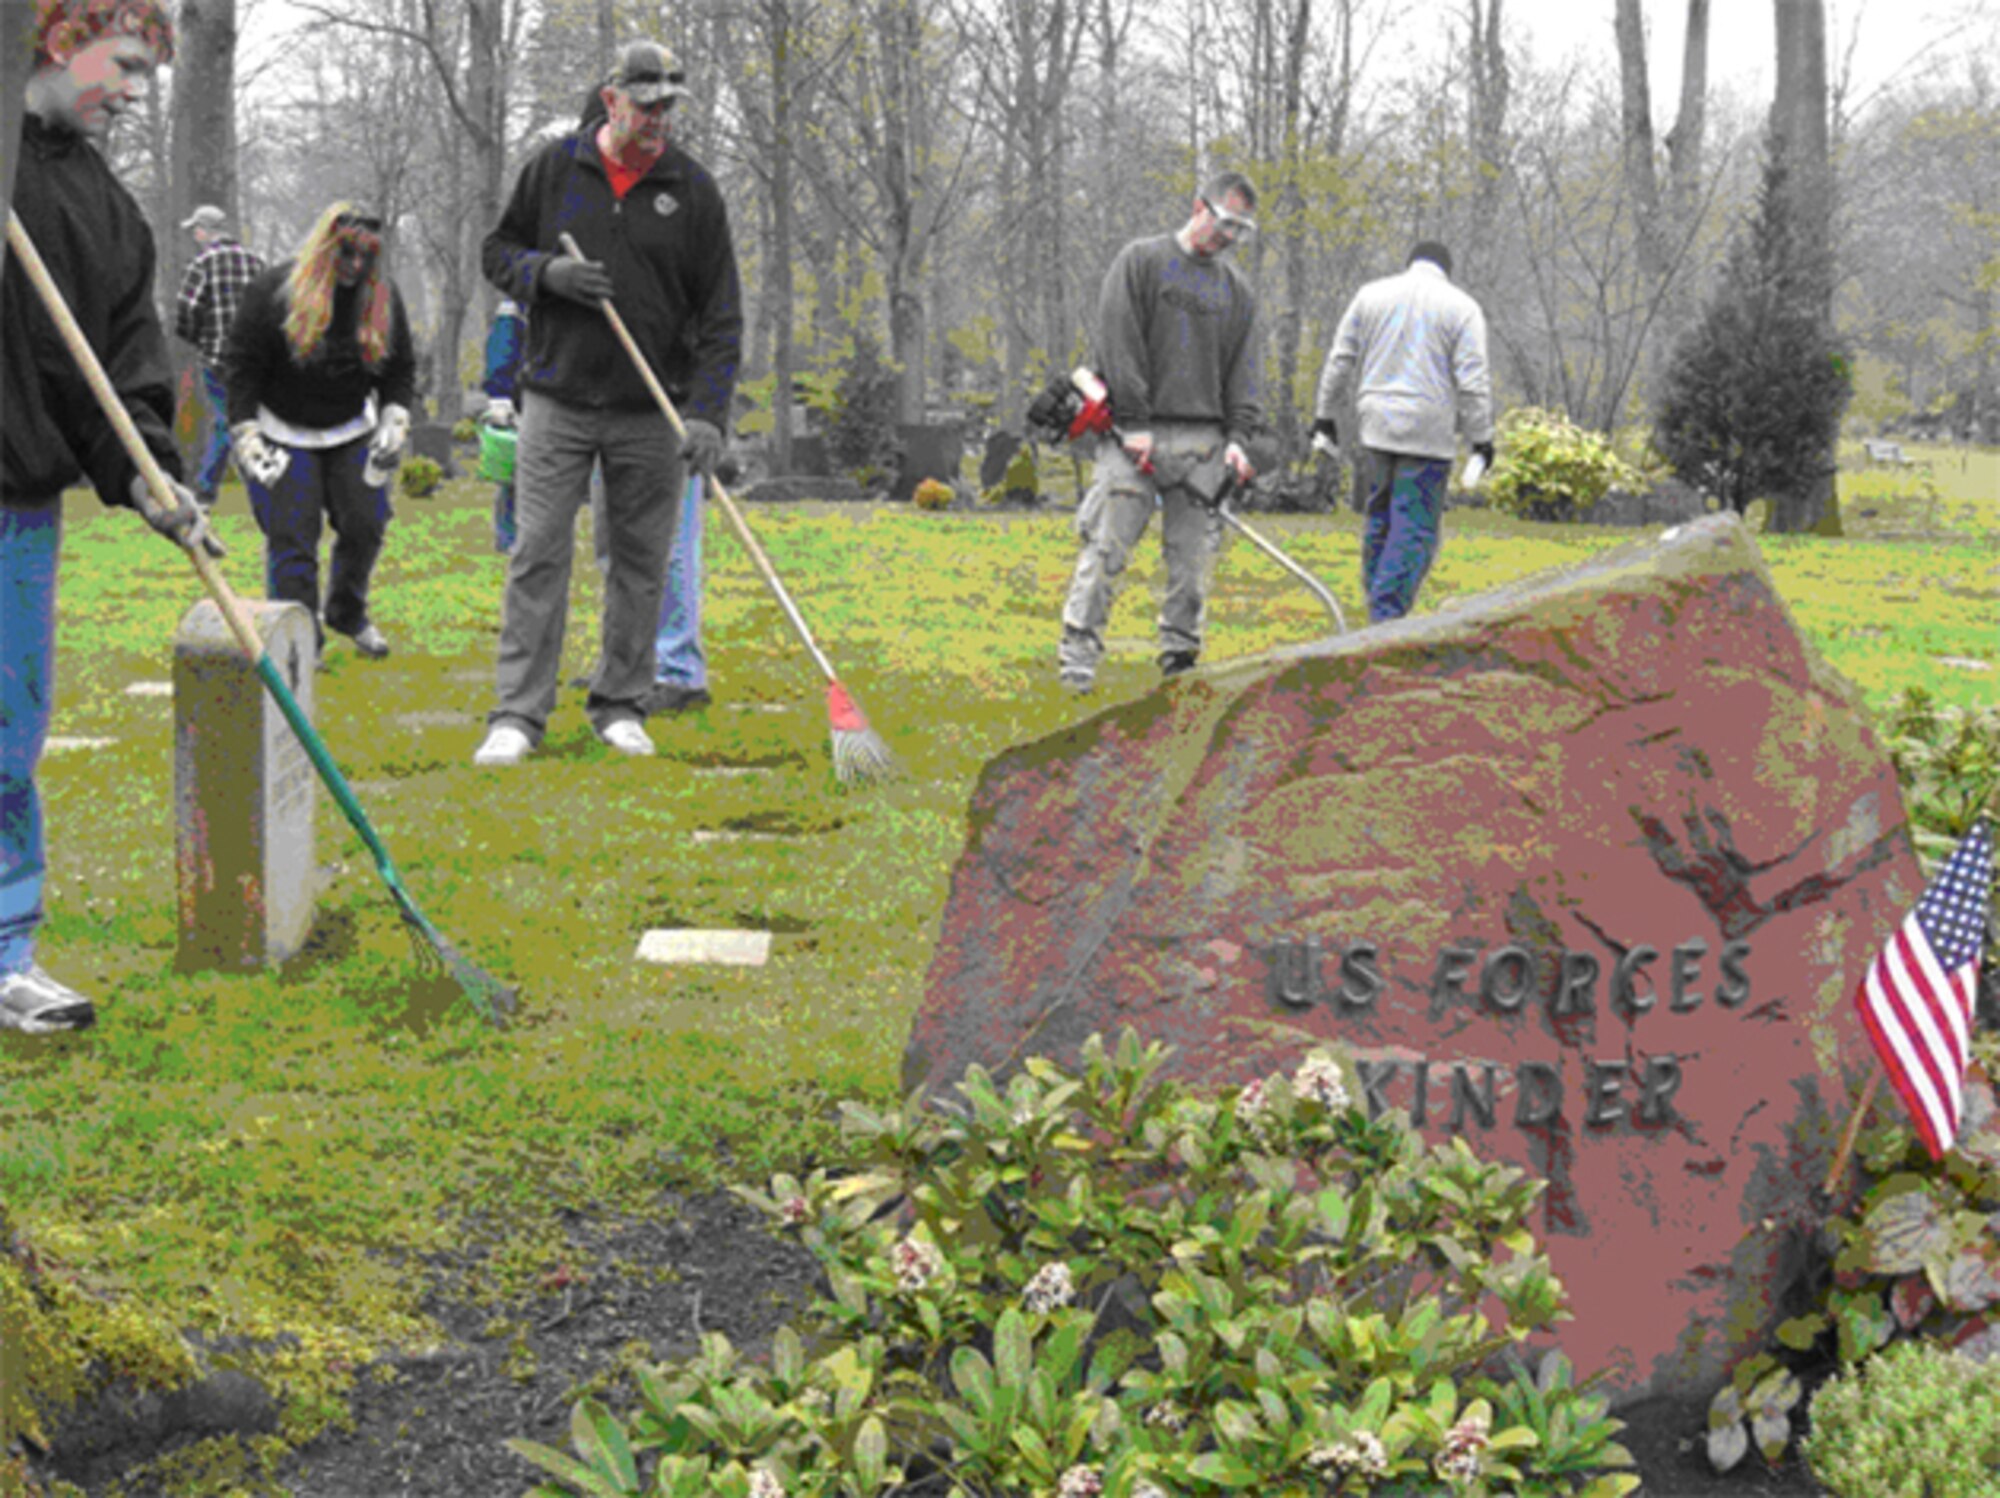 Members of the U.S. Air Forces in Europe Top 3 and their family members volunteer to clean the Kaiserslautern American Kindergraves. The Ramstein Area Chief’s Group and German-American and International Women’s Club provide oversight to the 451 children’s graves.

